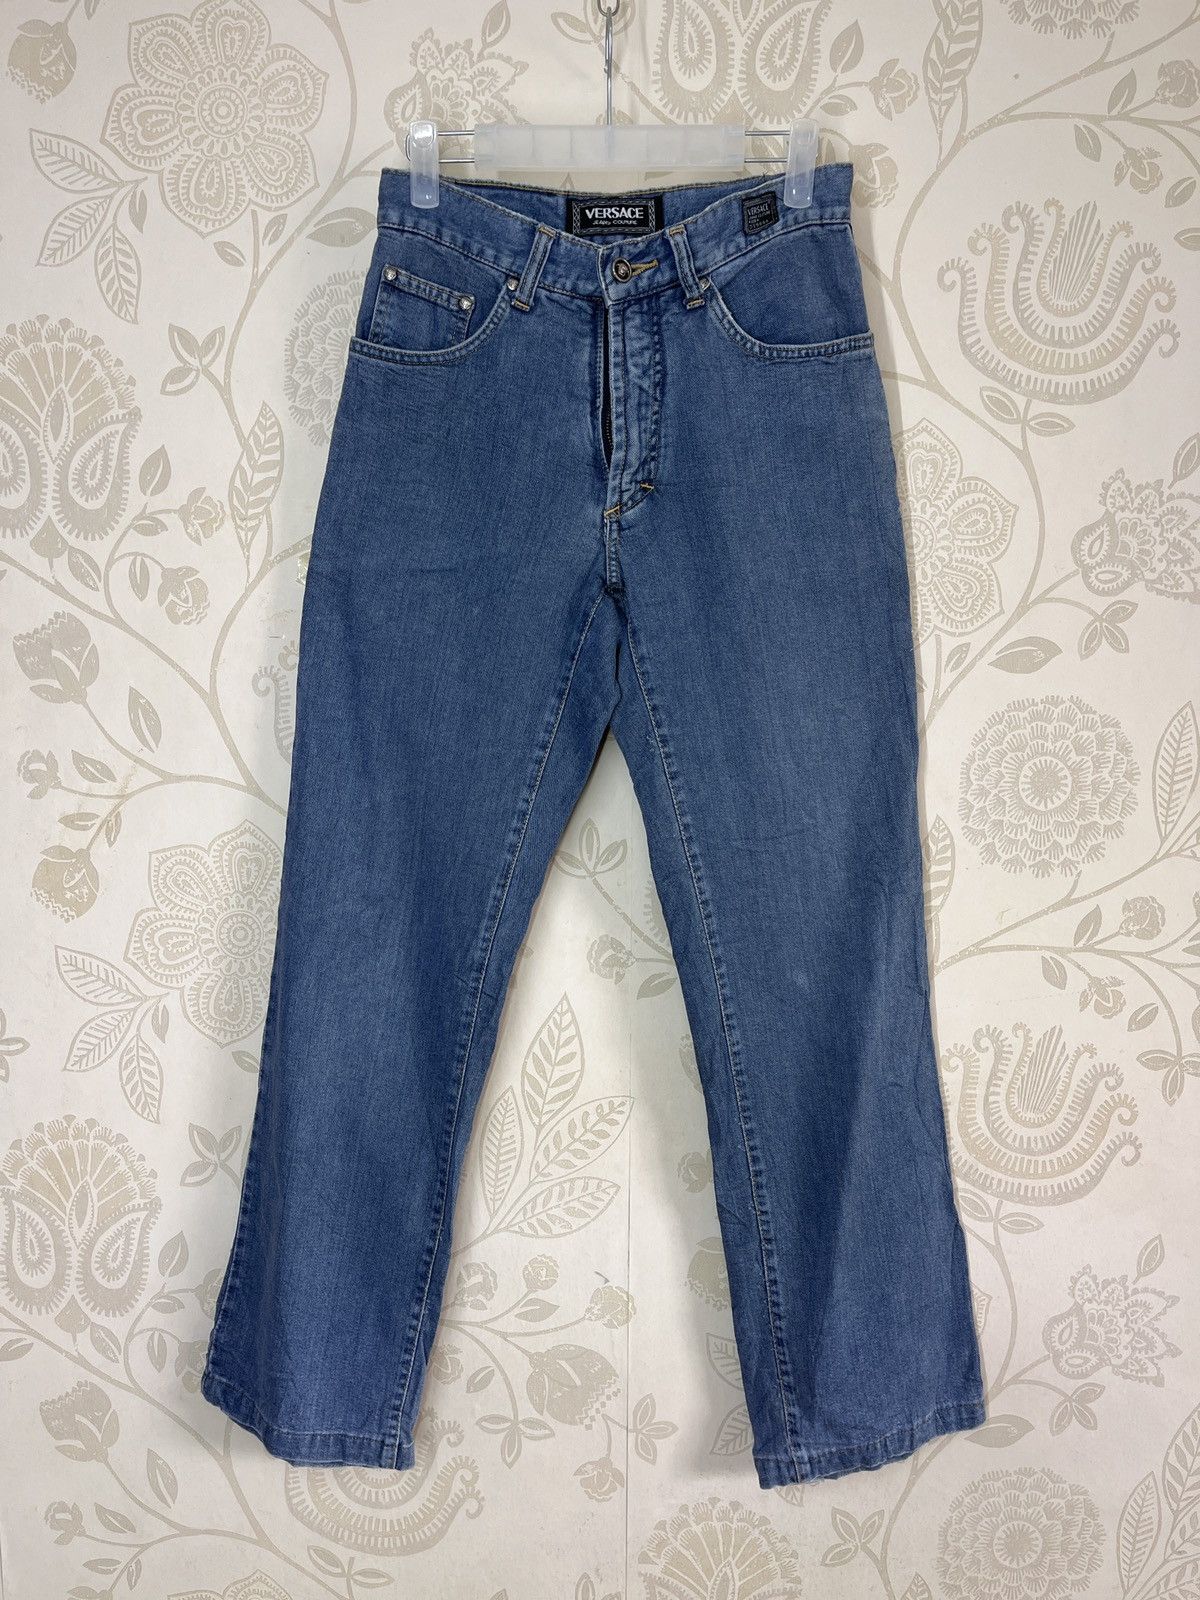 Vintage Versace Denim Jeans Made In Italy - 1